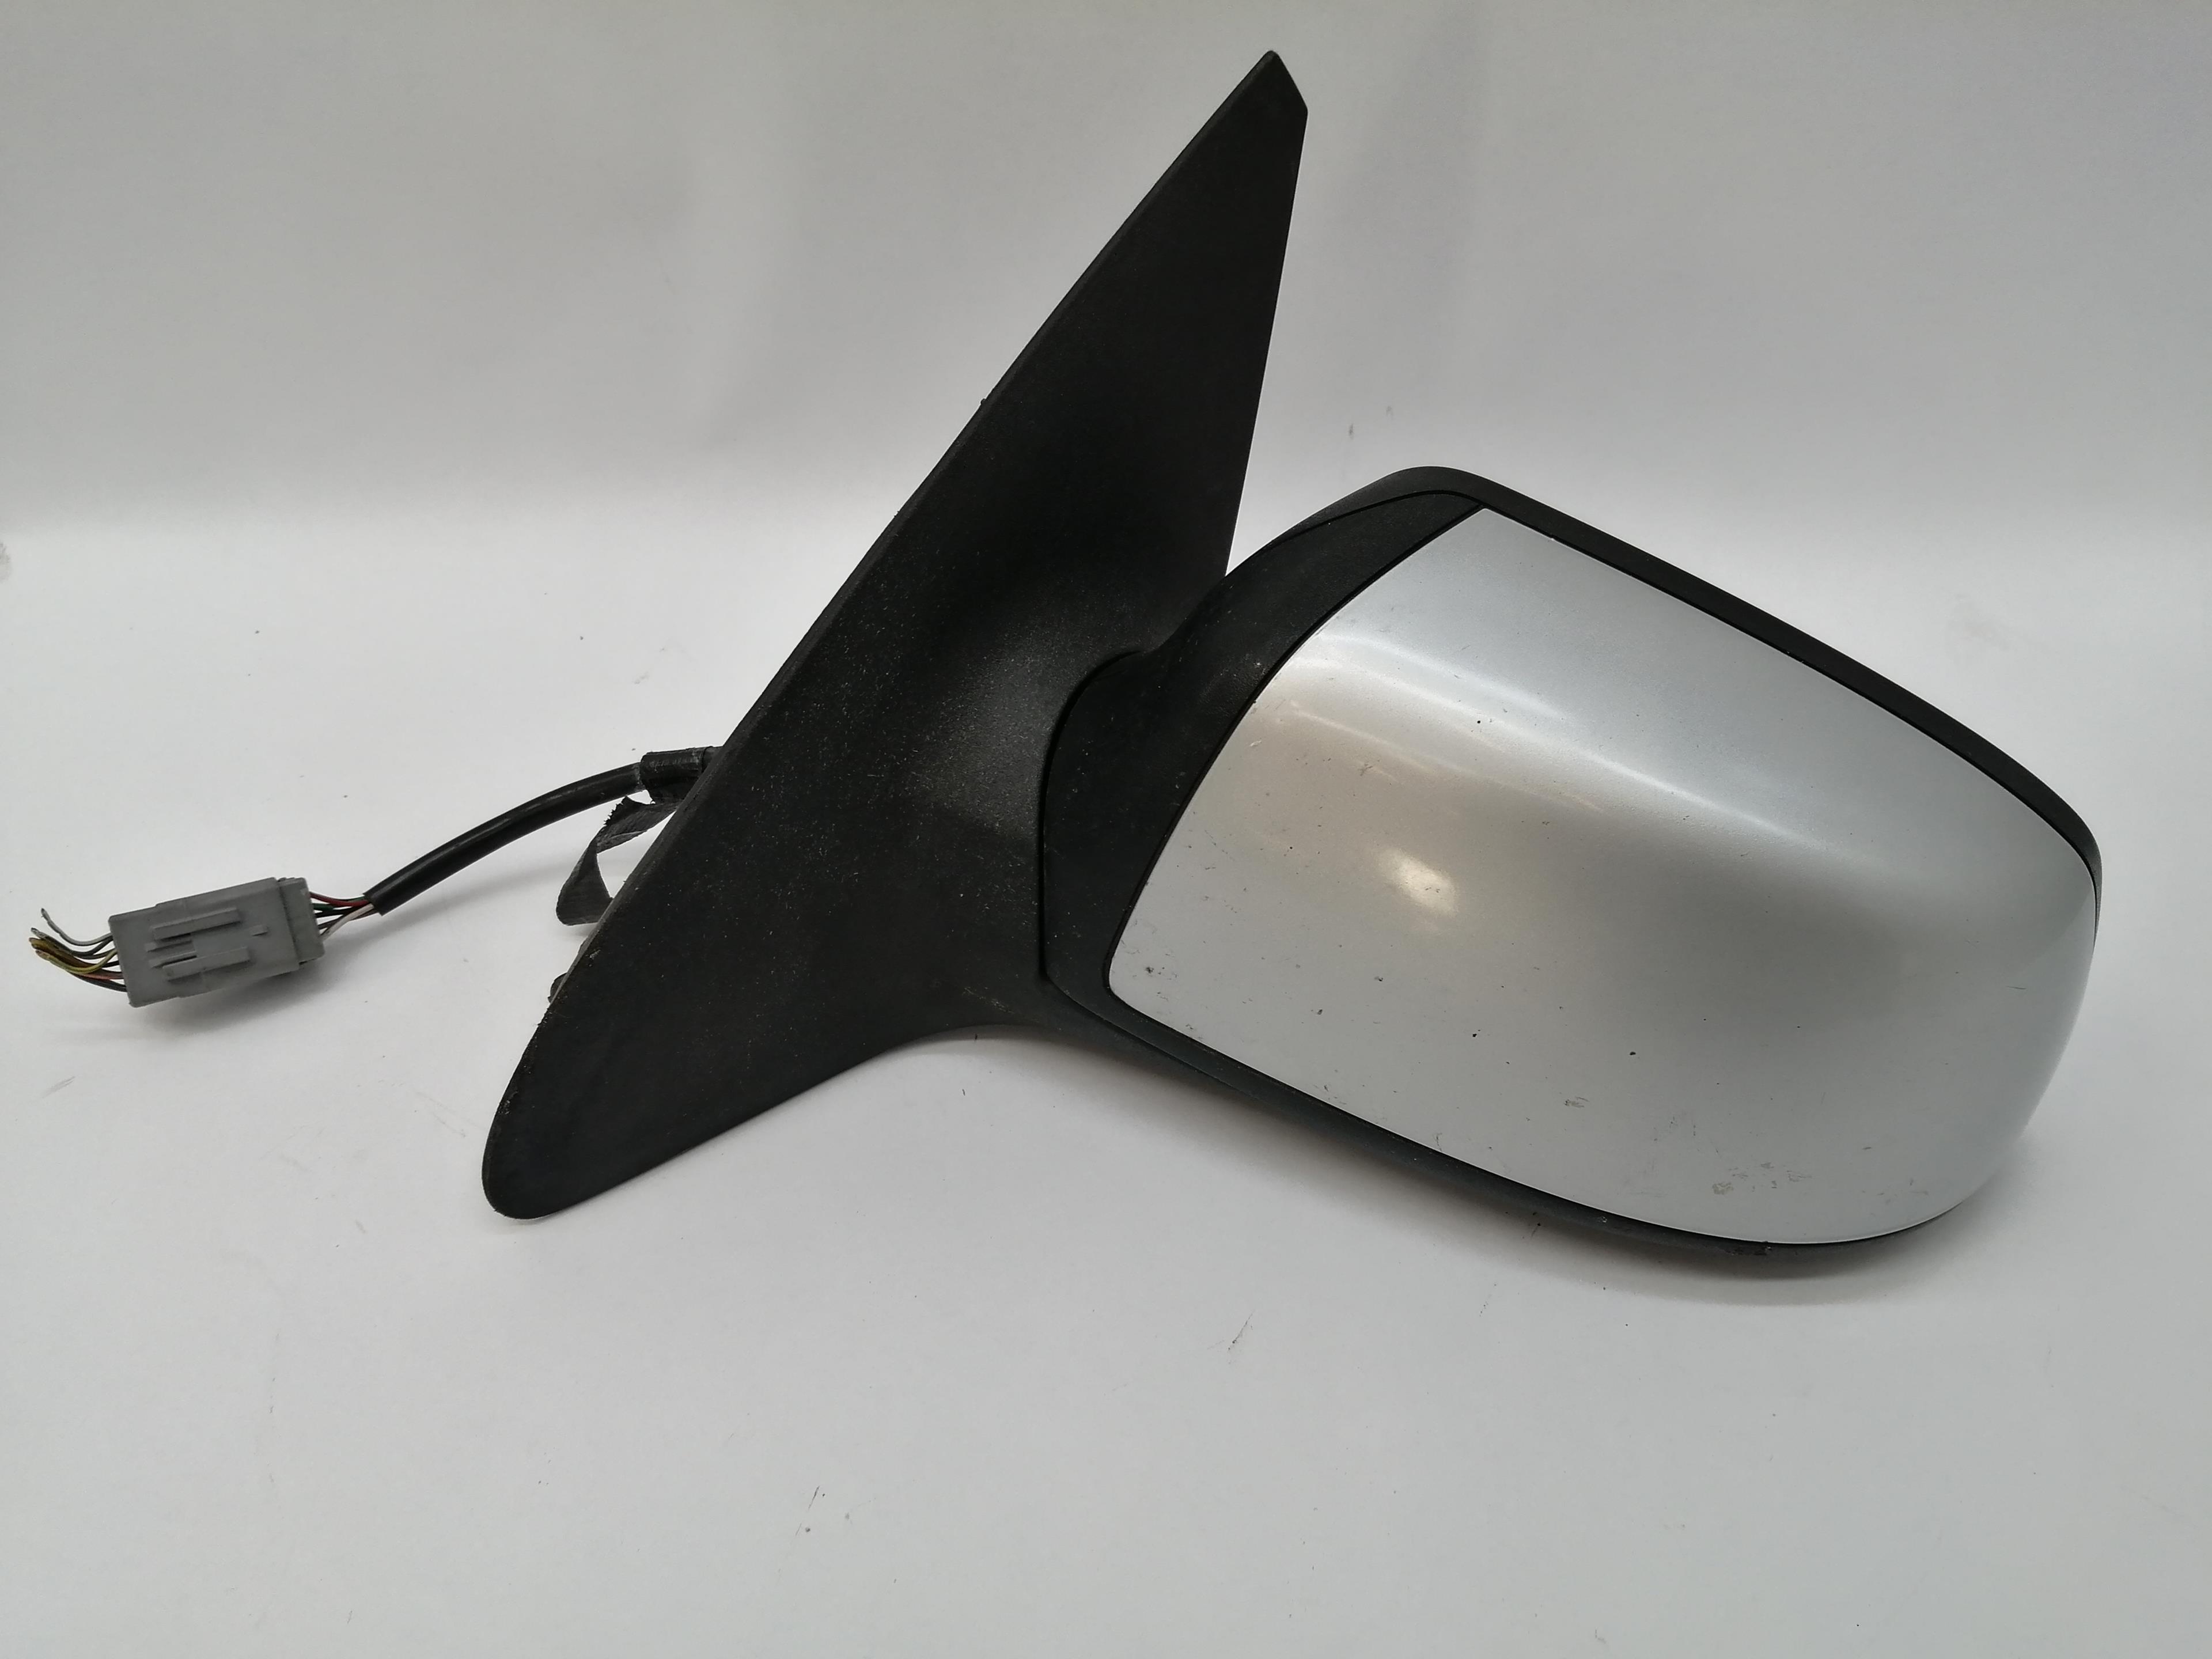 FORD Mondeo 3 generation (2000-2007) Left Side Wing Mirror 1375189 23535985